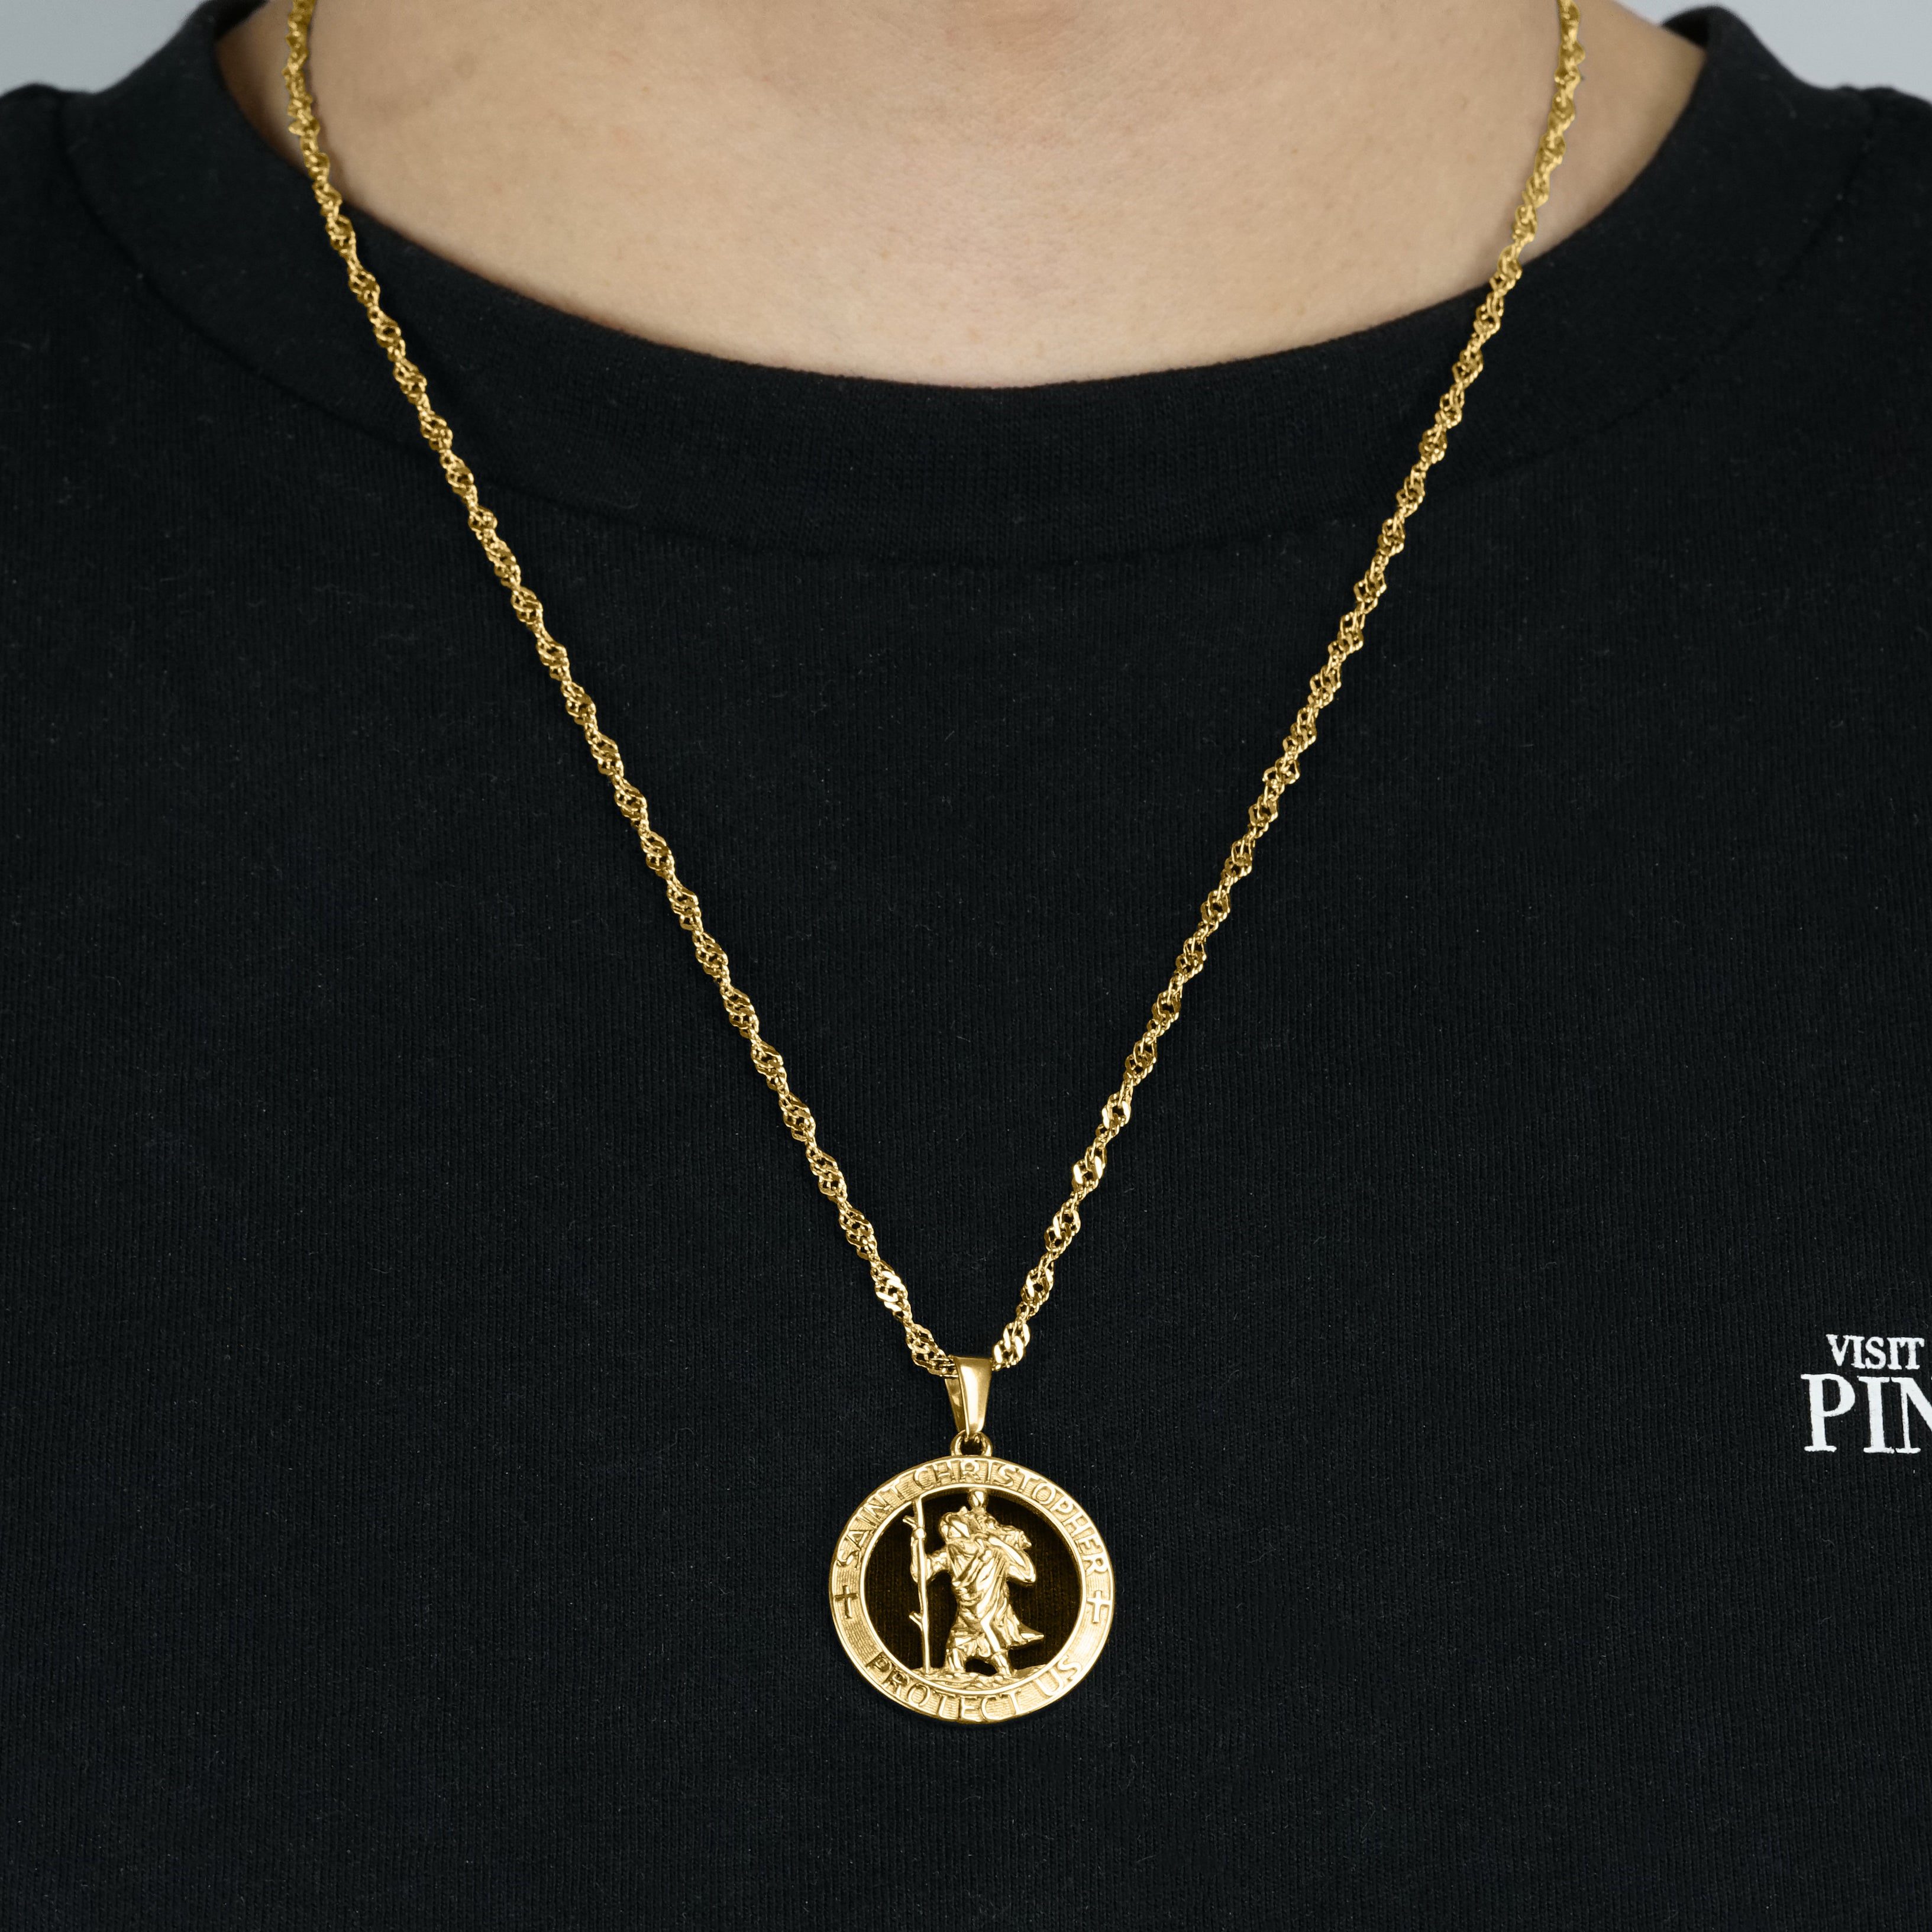 ST. CHRISTOPHER NECKLACE - GOLD TONE